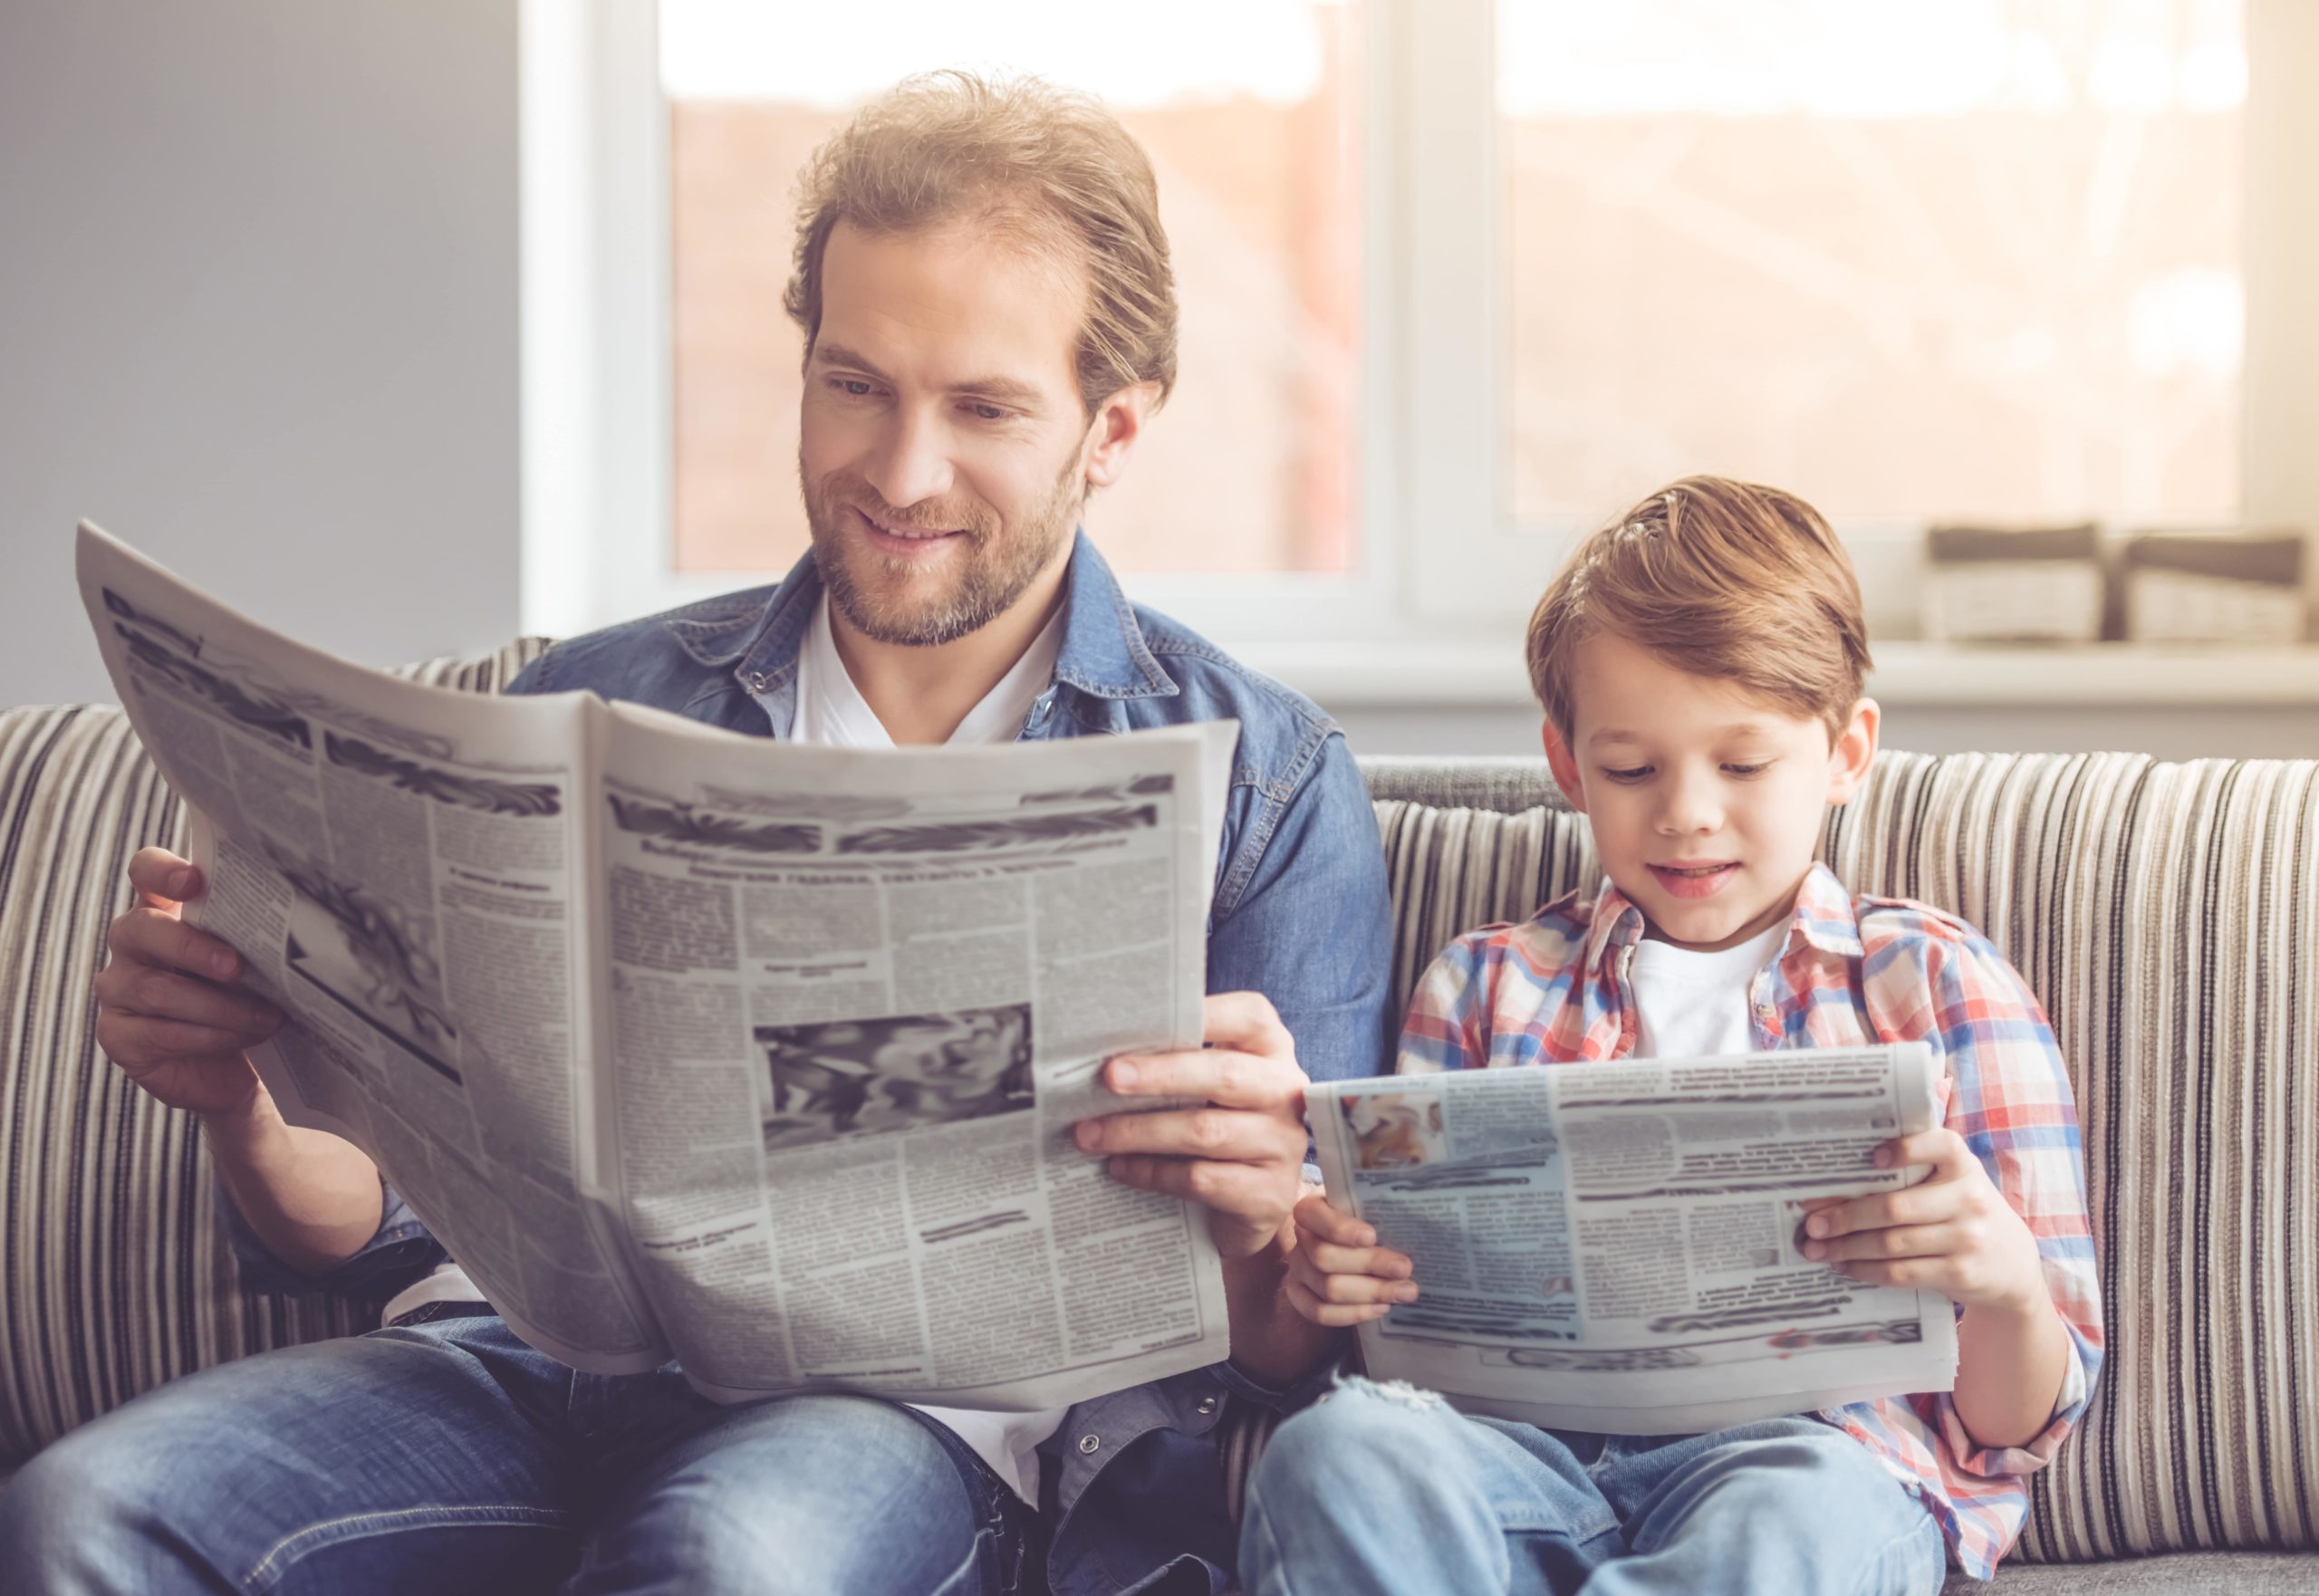 Father and son reading newspapers.